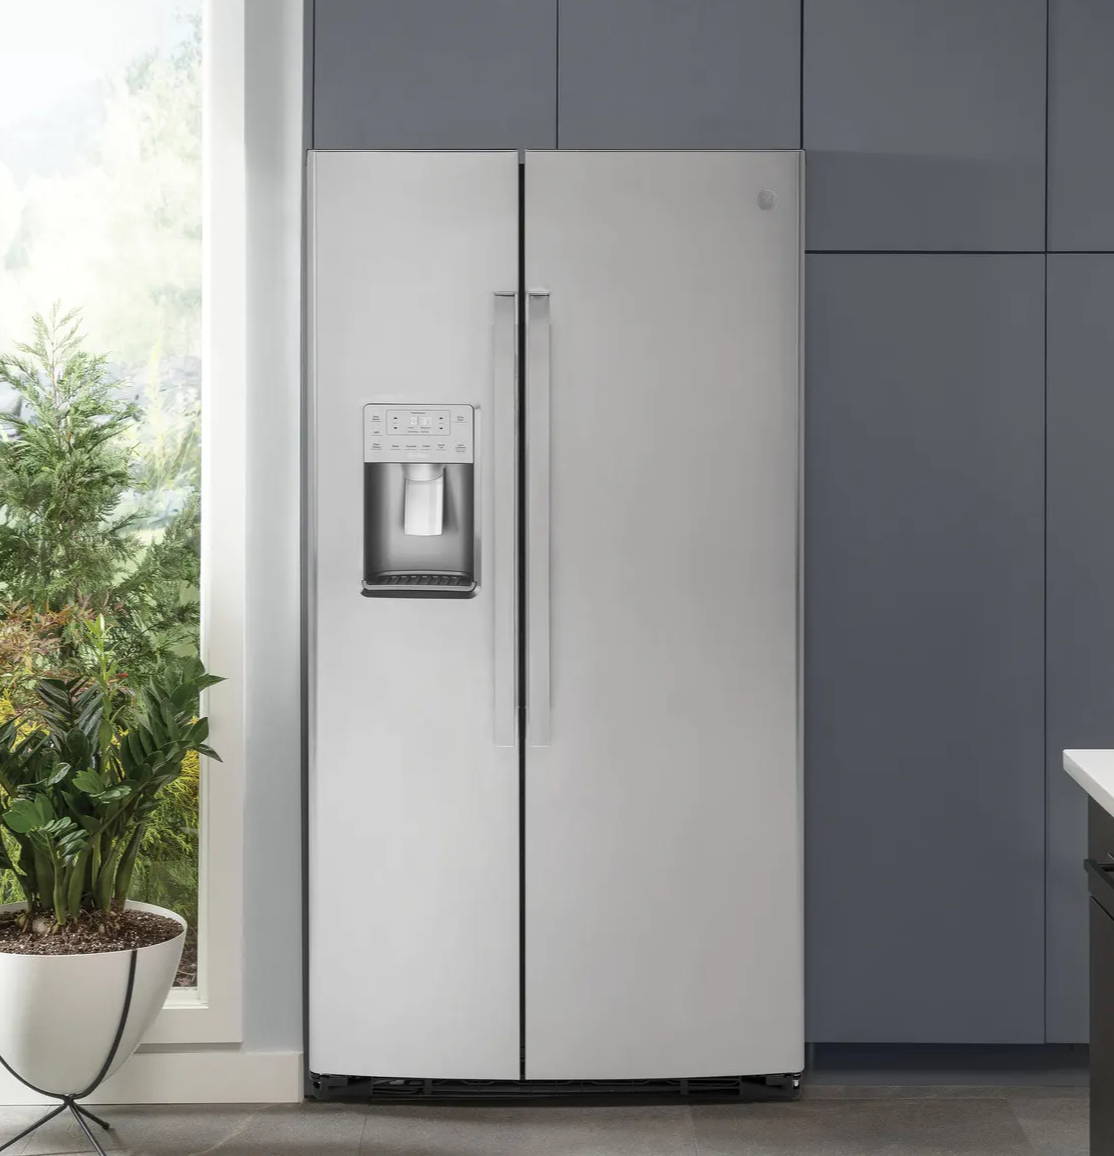 GE Appliances Feature Videos - Side-by-side refrigerators